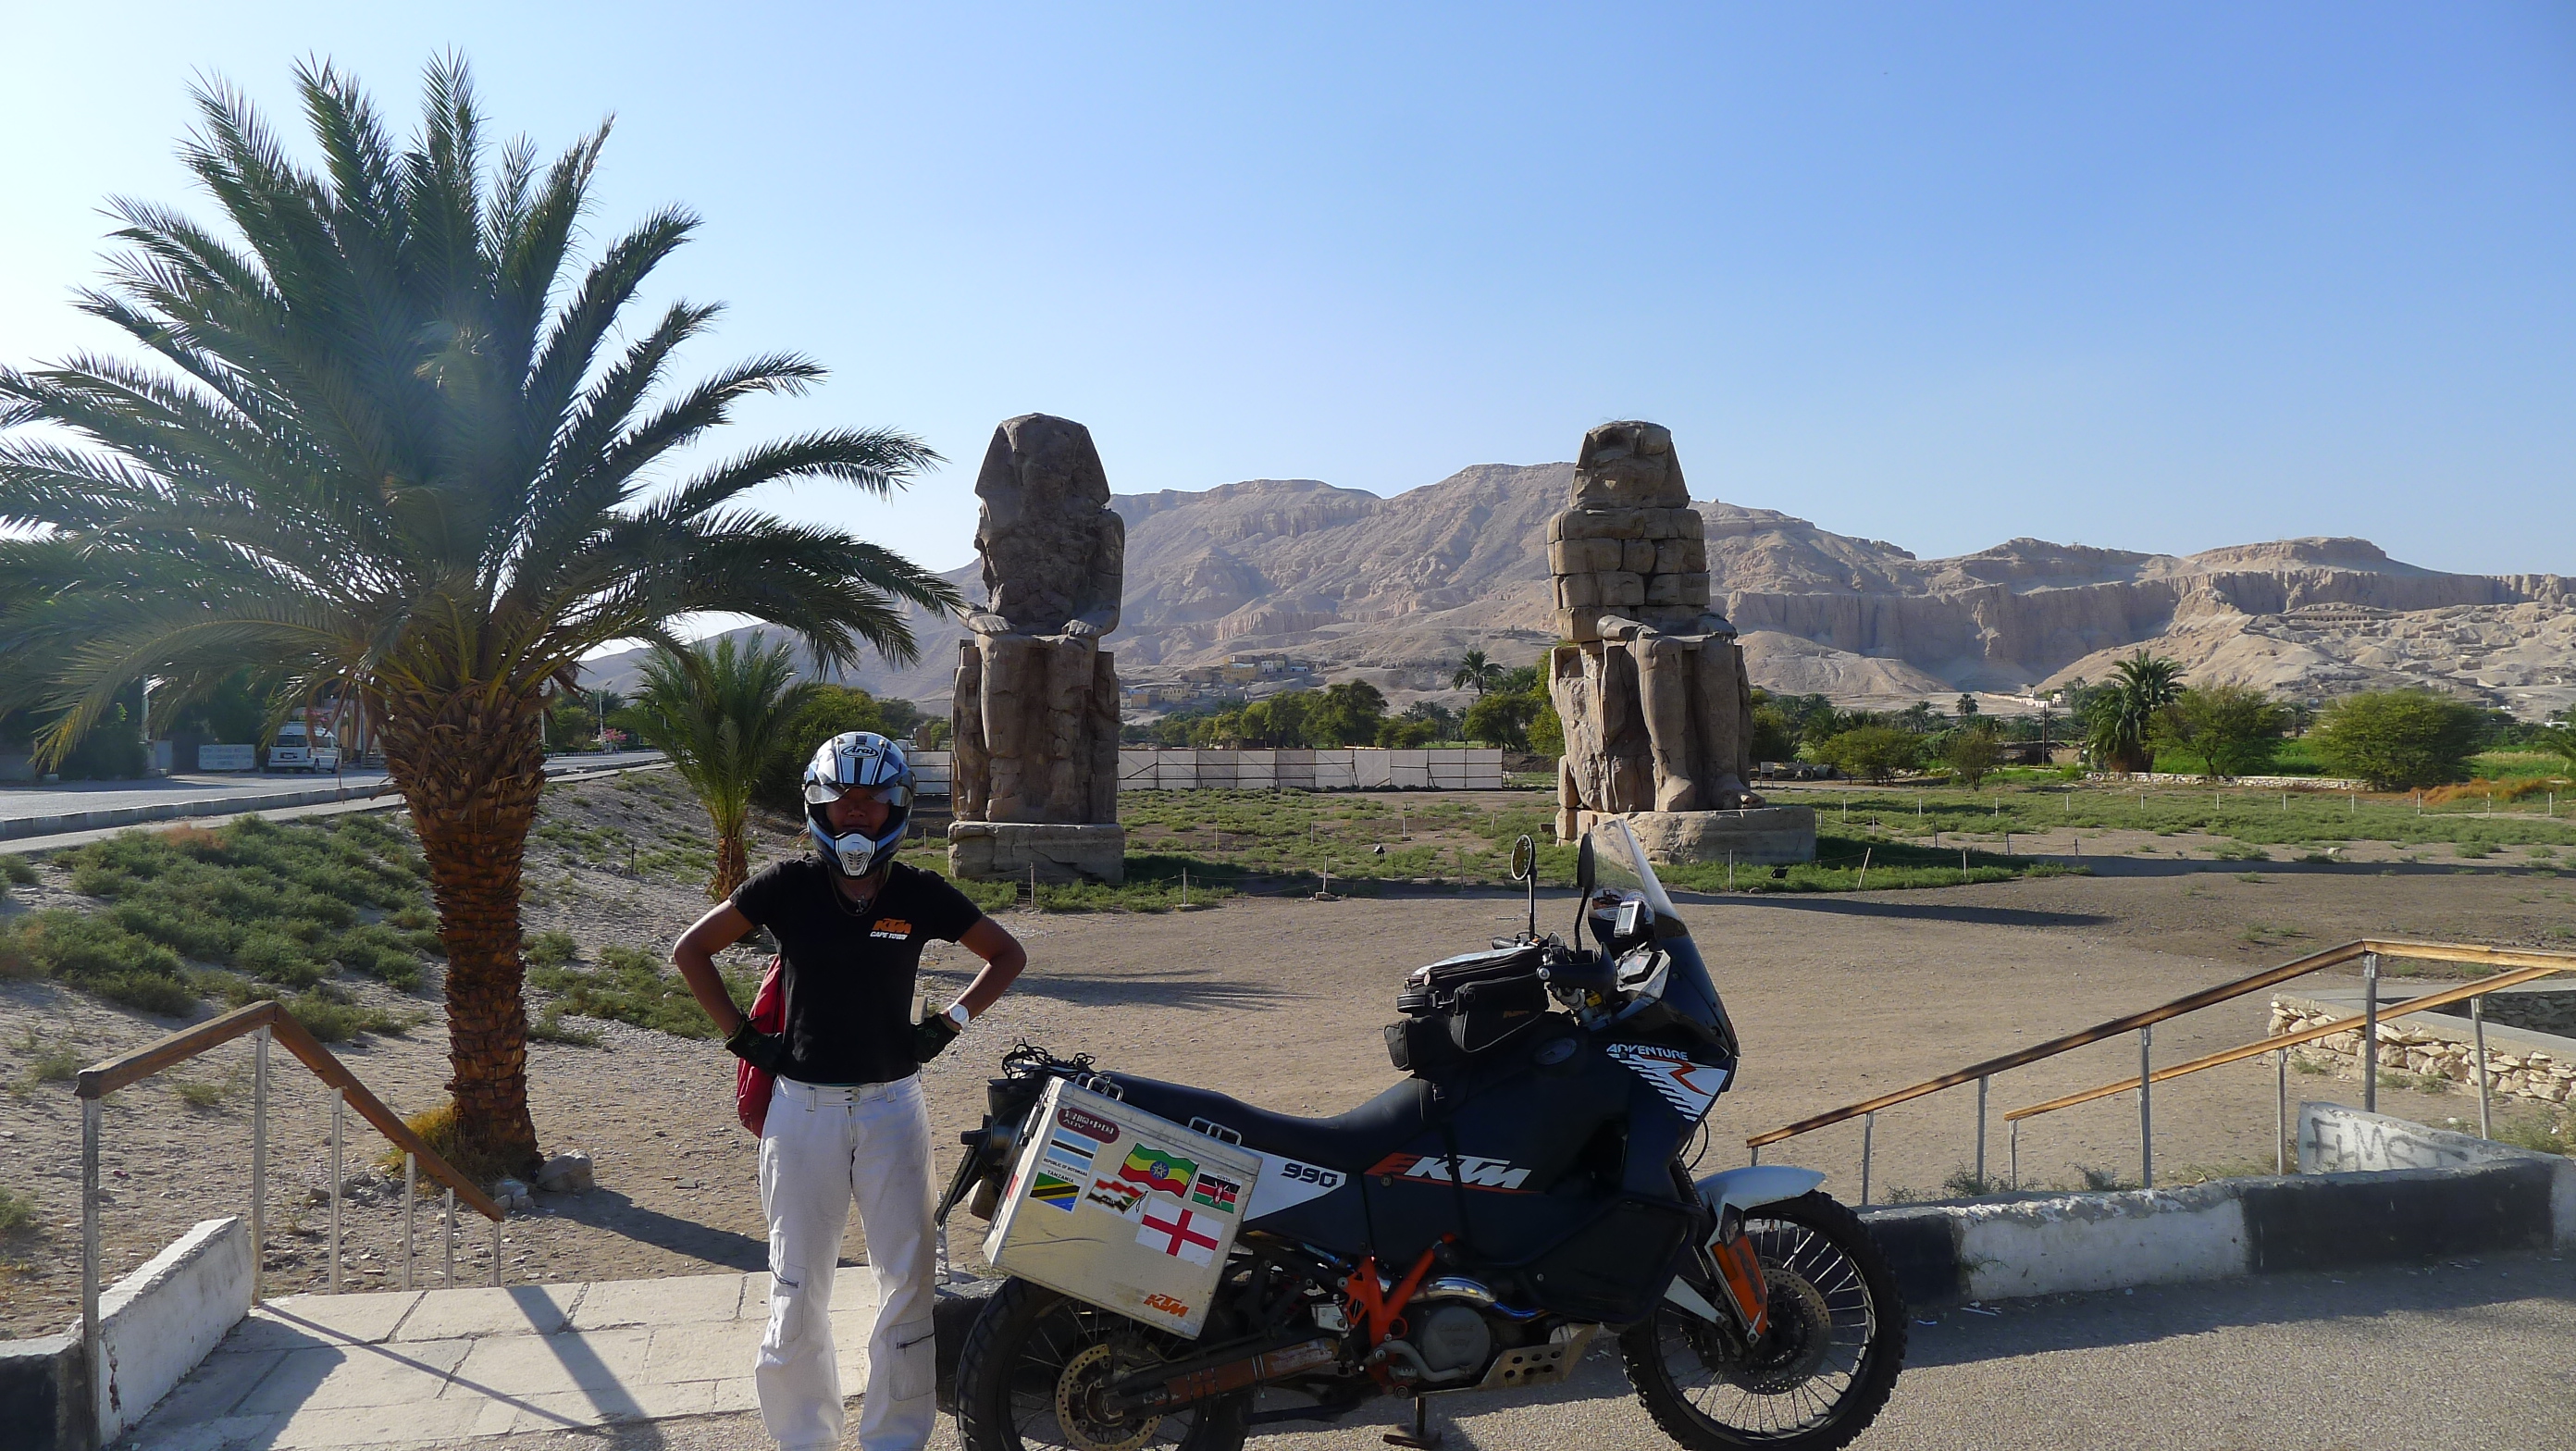 Posing against the ancient statues in Luxor near the valley of the Kings.